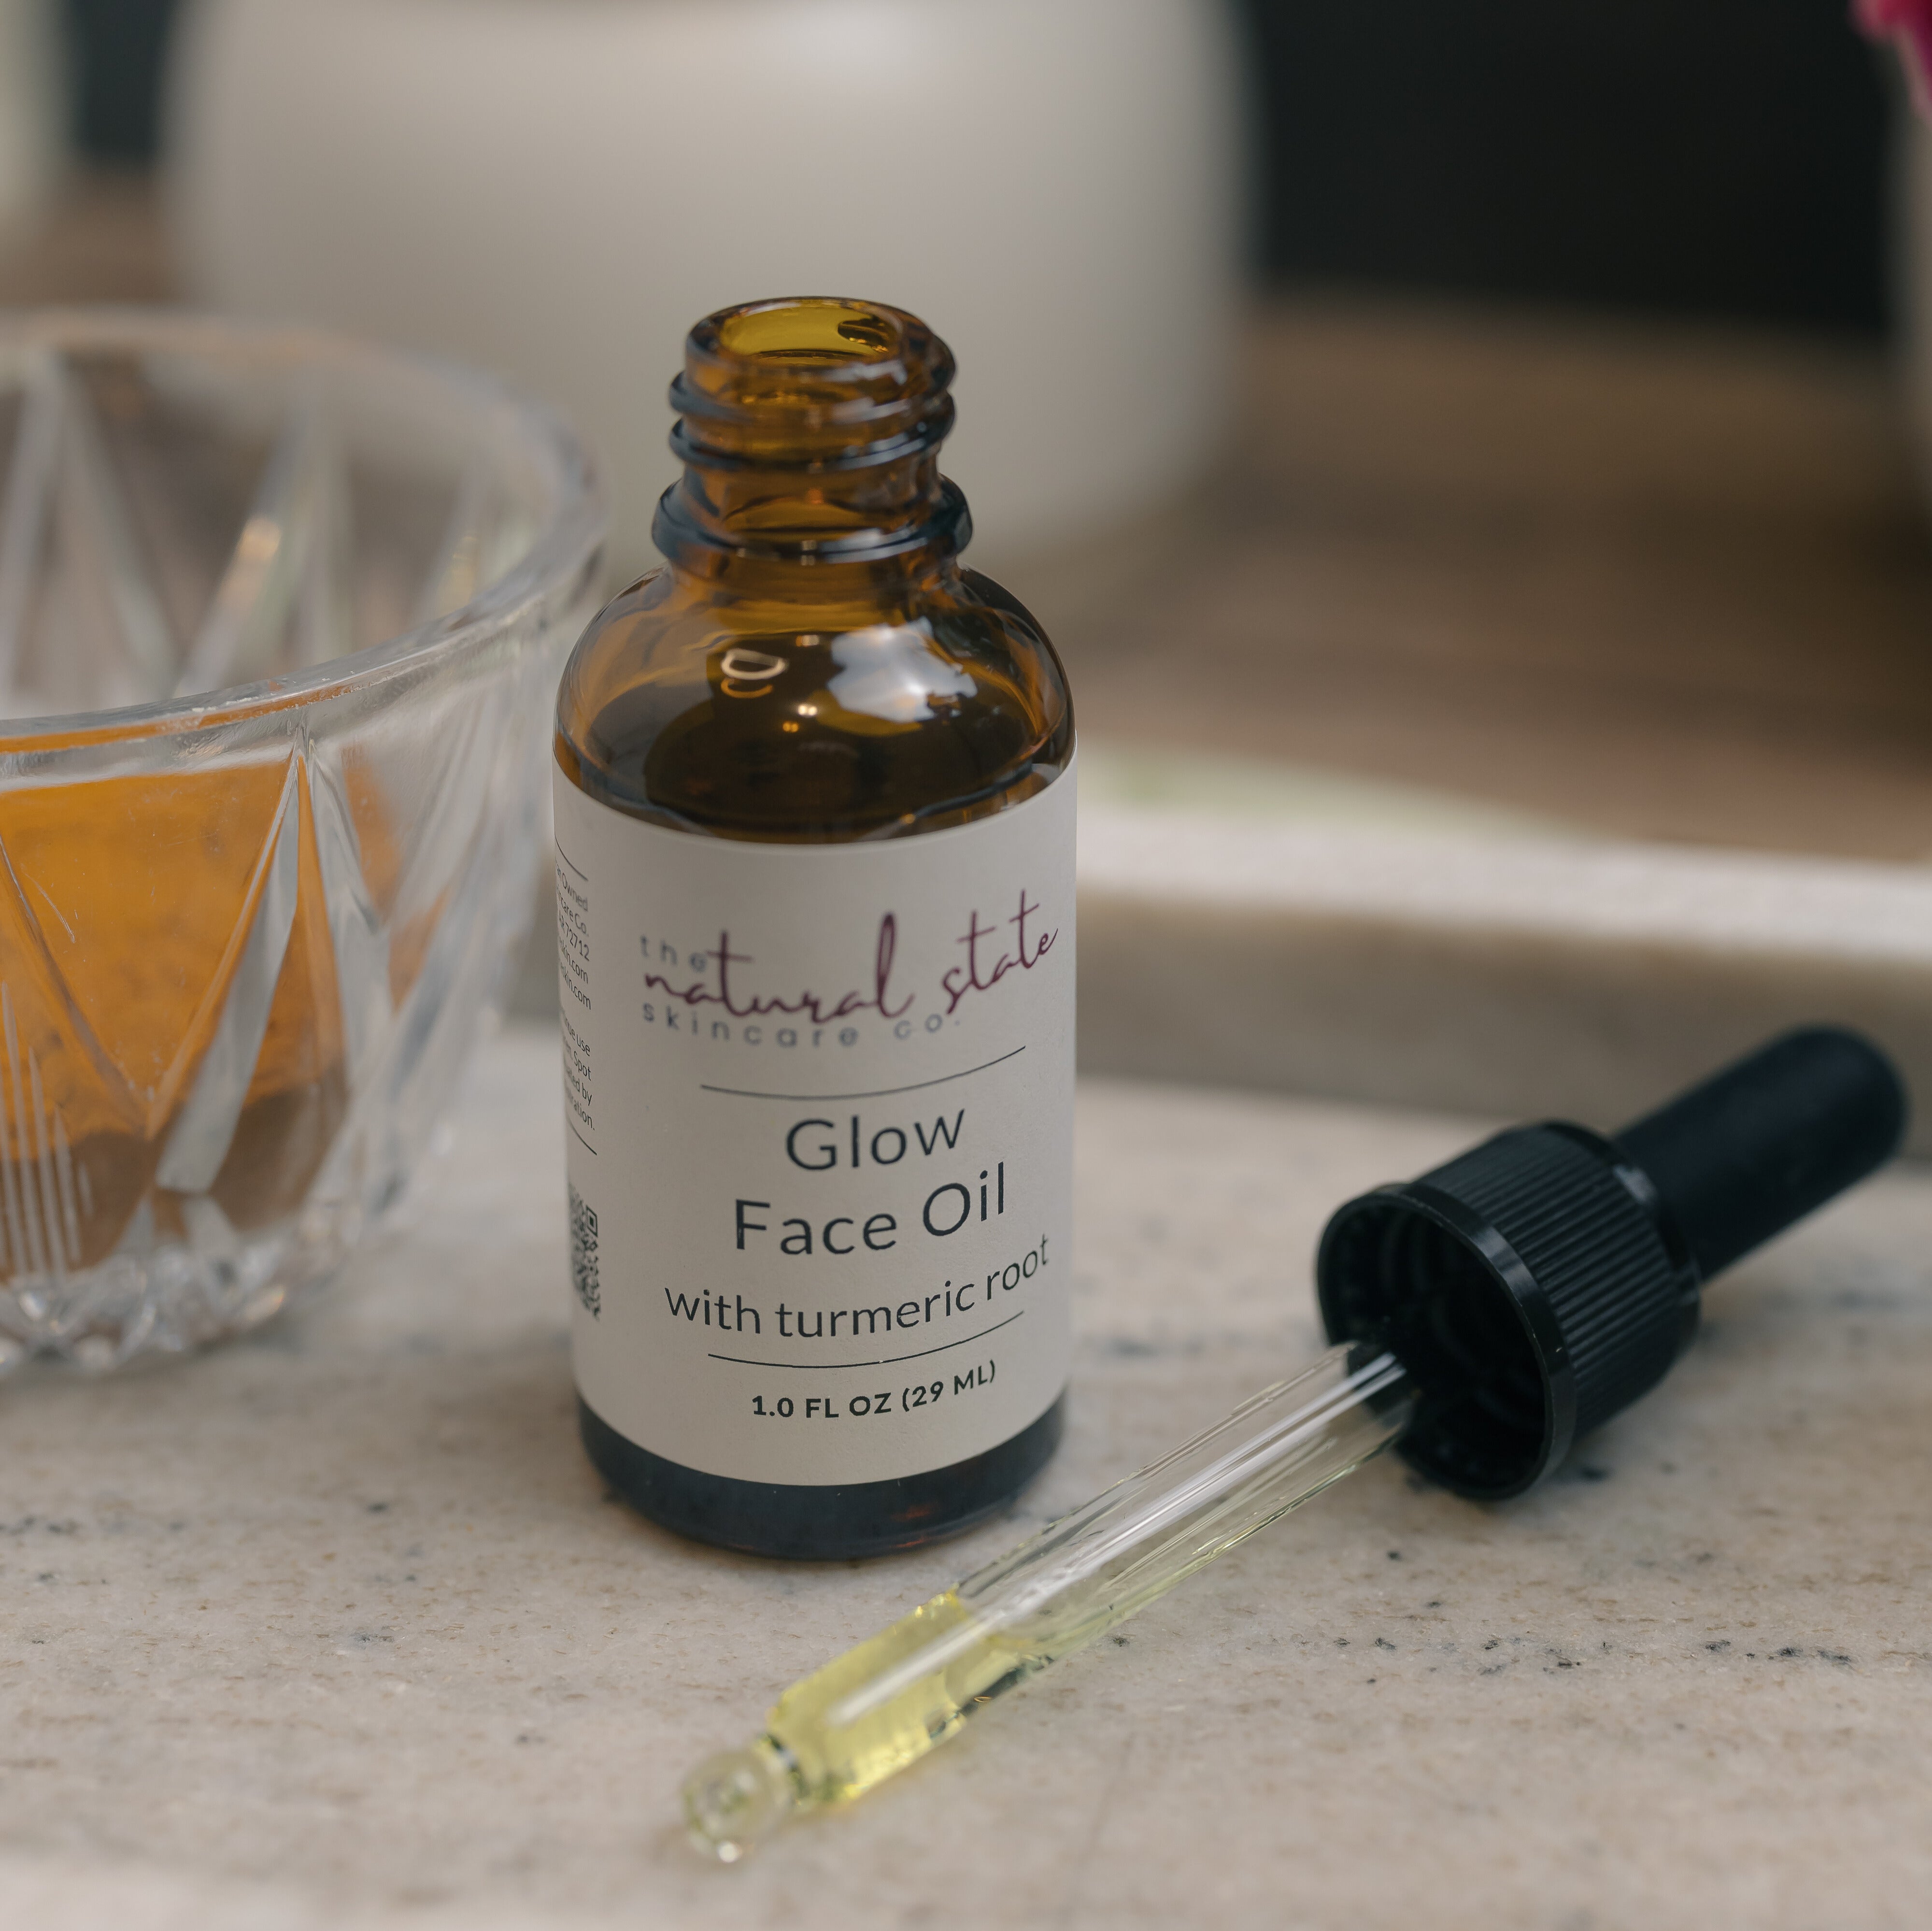 O My! 100% Pure Essential Oils, Child-resistant, Tamper-proof